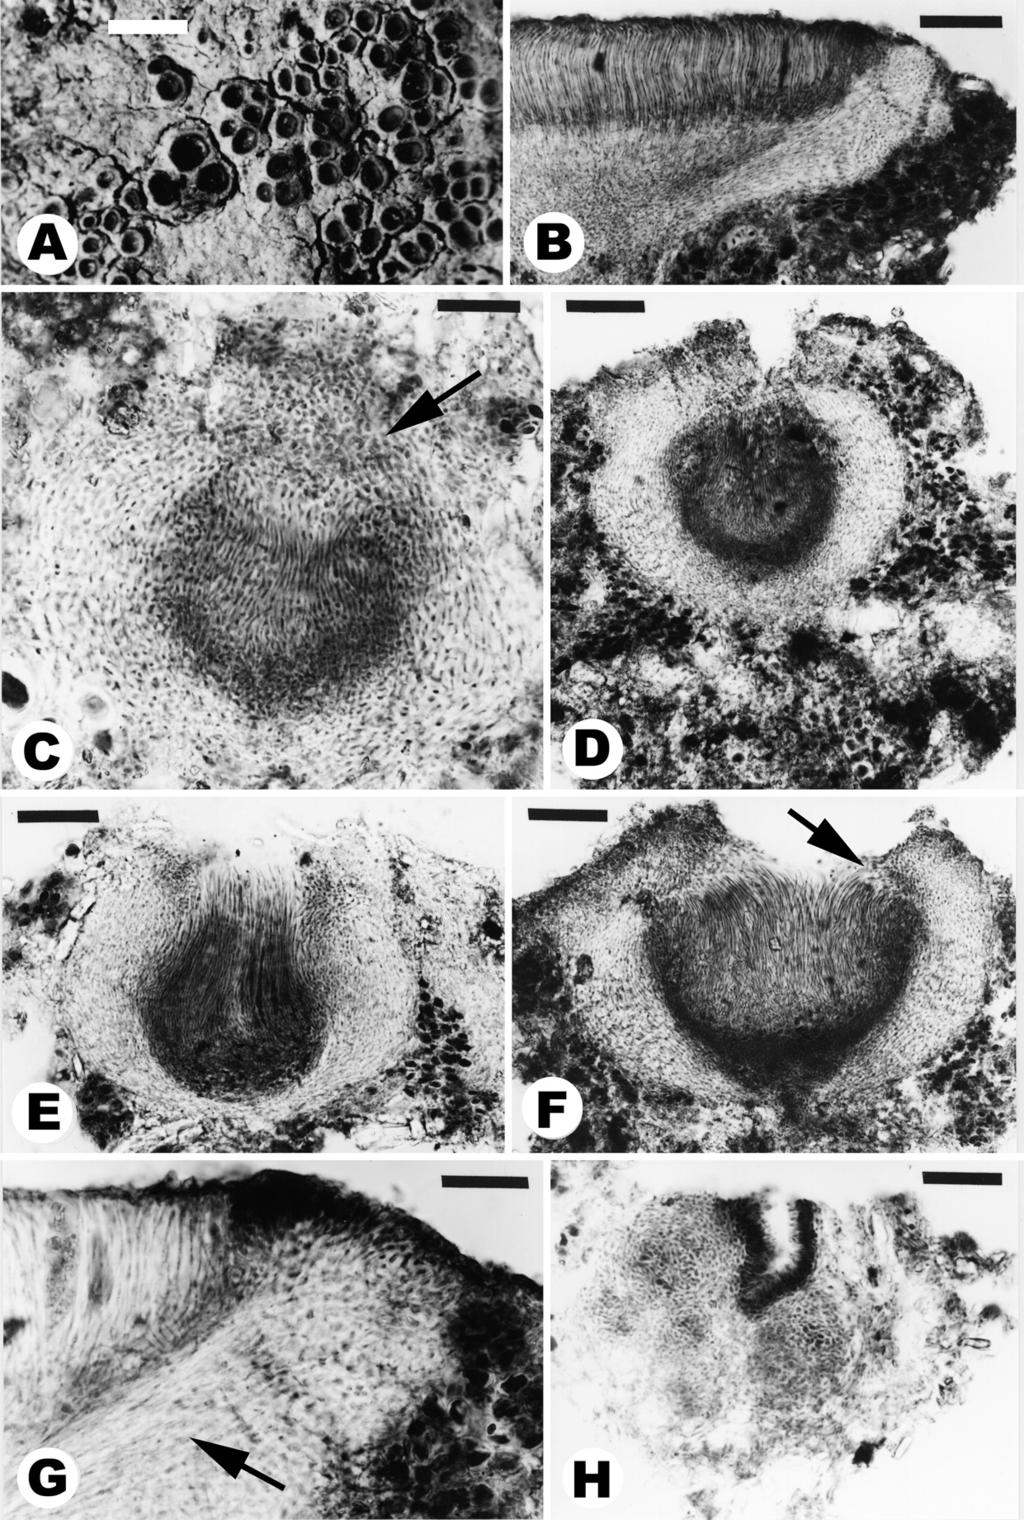 282 Henssen & Lücking ANN. BOT. FENNICI Vol. 39 Fig. 6. Apothecial anatomy and ontogeny in Gyalidea lecanorina (New Zealand, Henssen 30360a; B H microtome sections in LB).